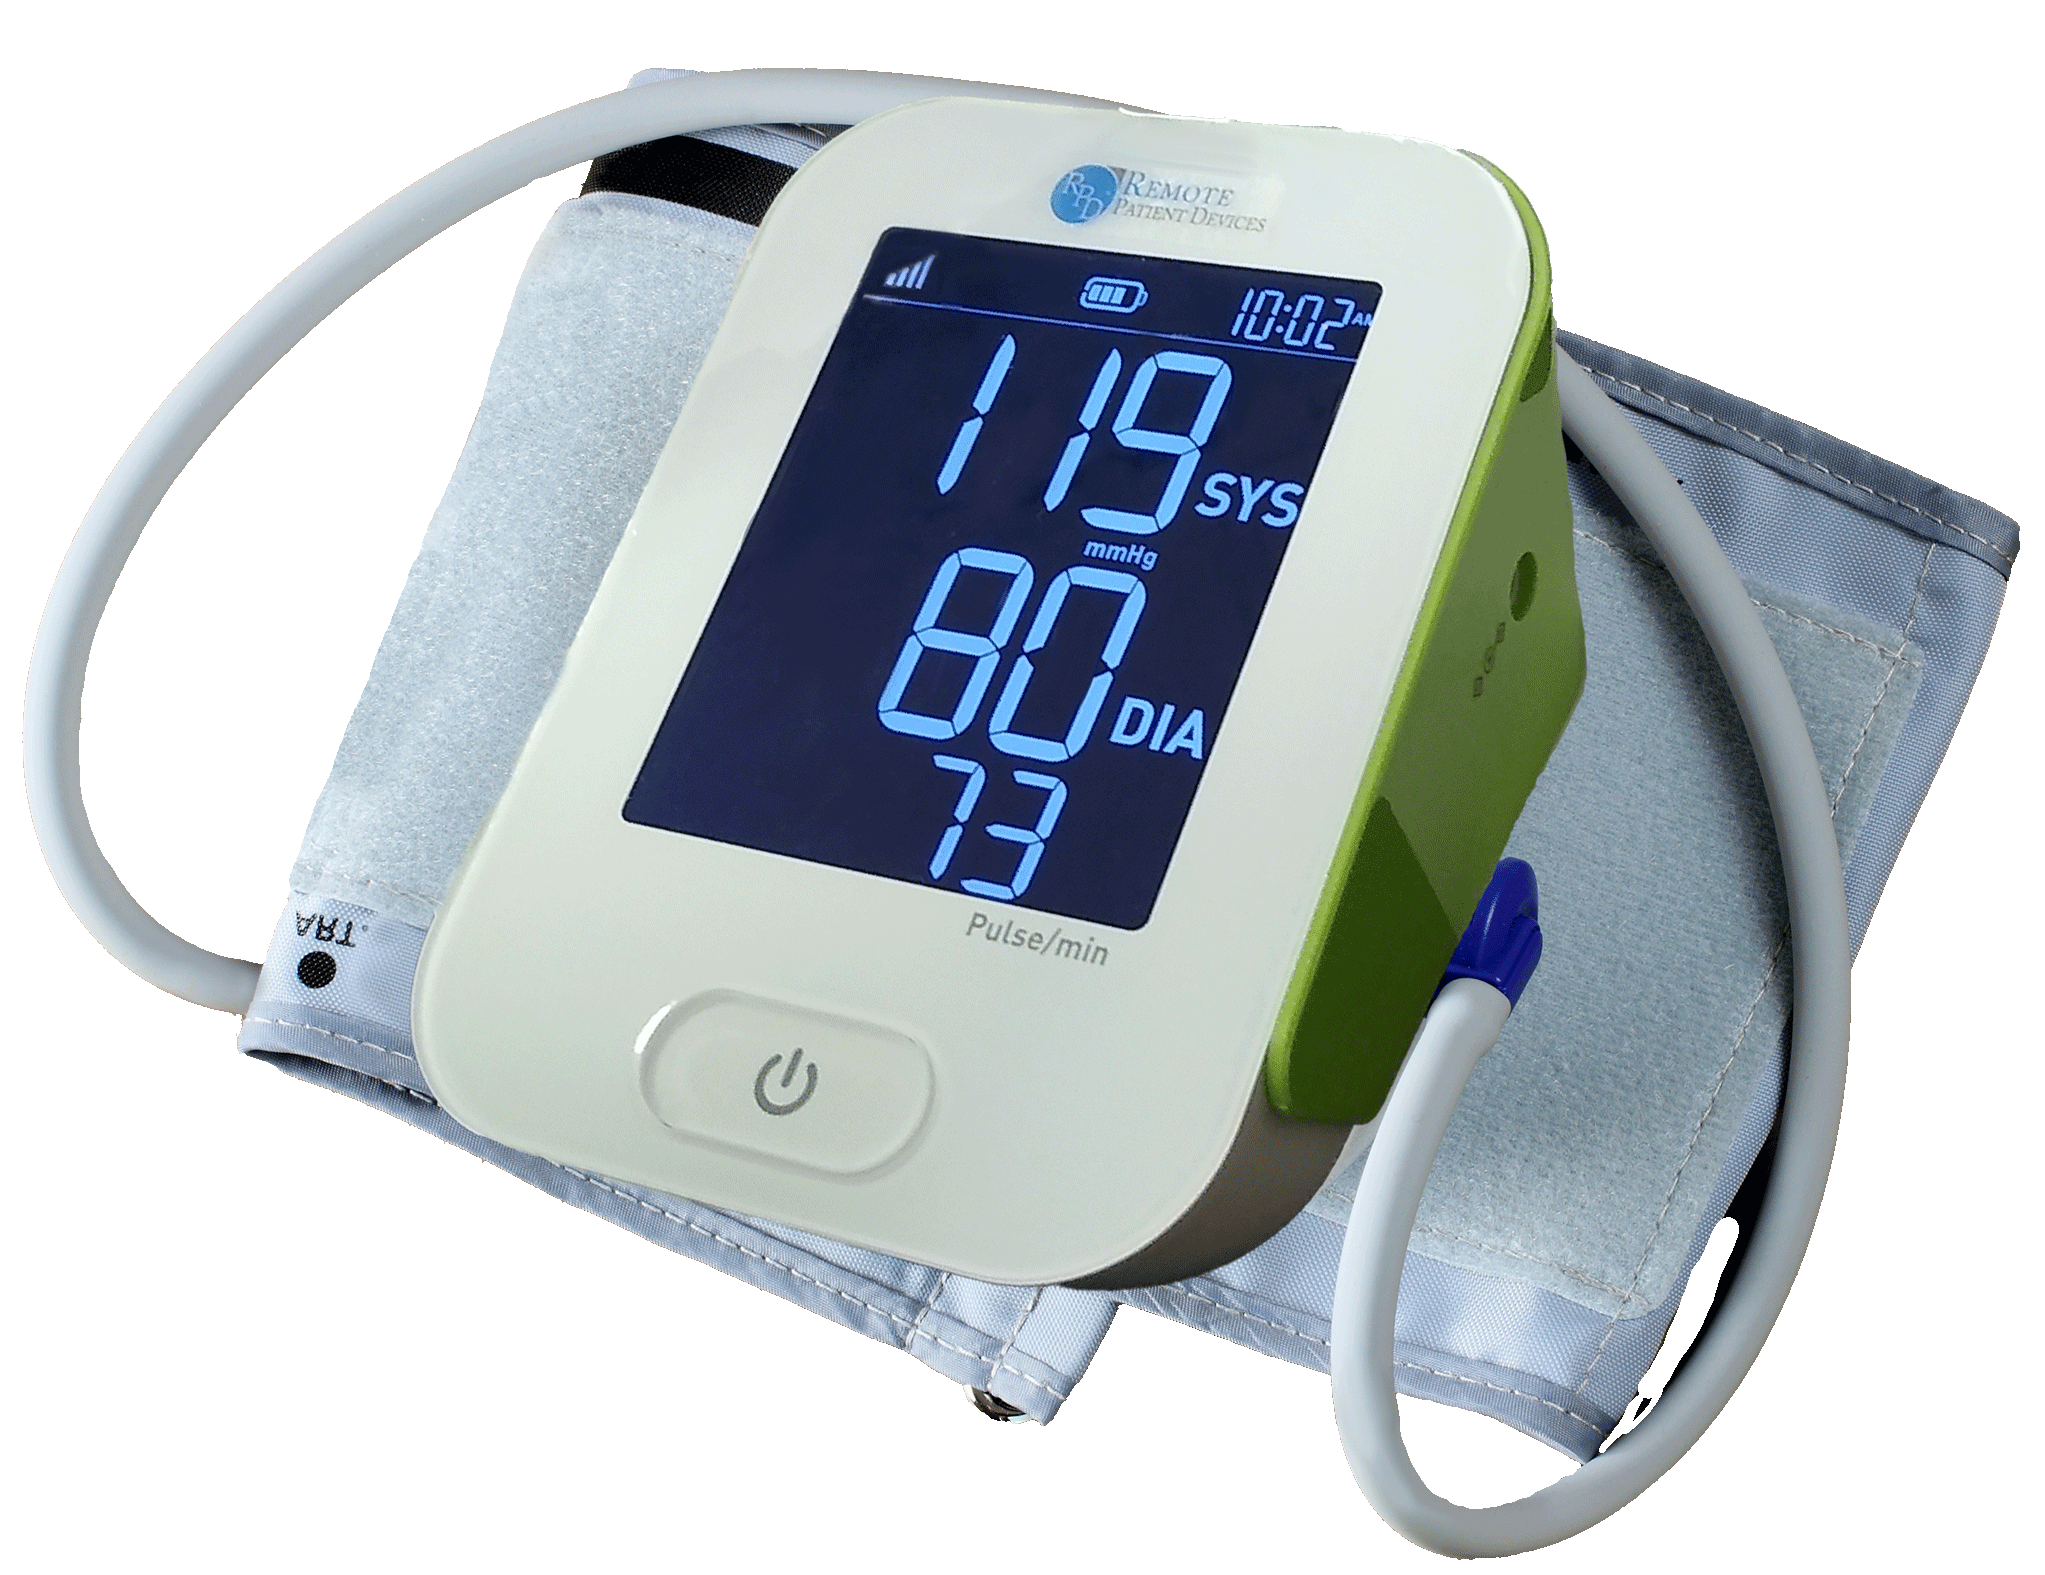 Remote Patient Monitoring Devices